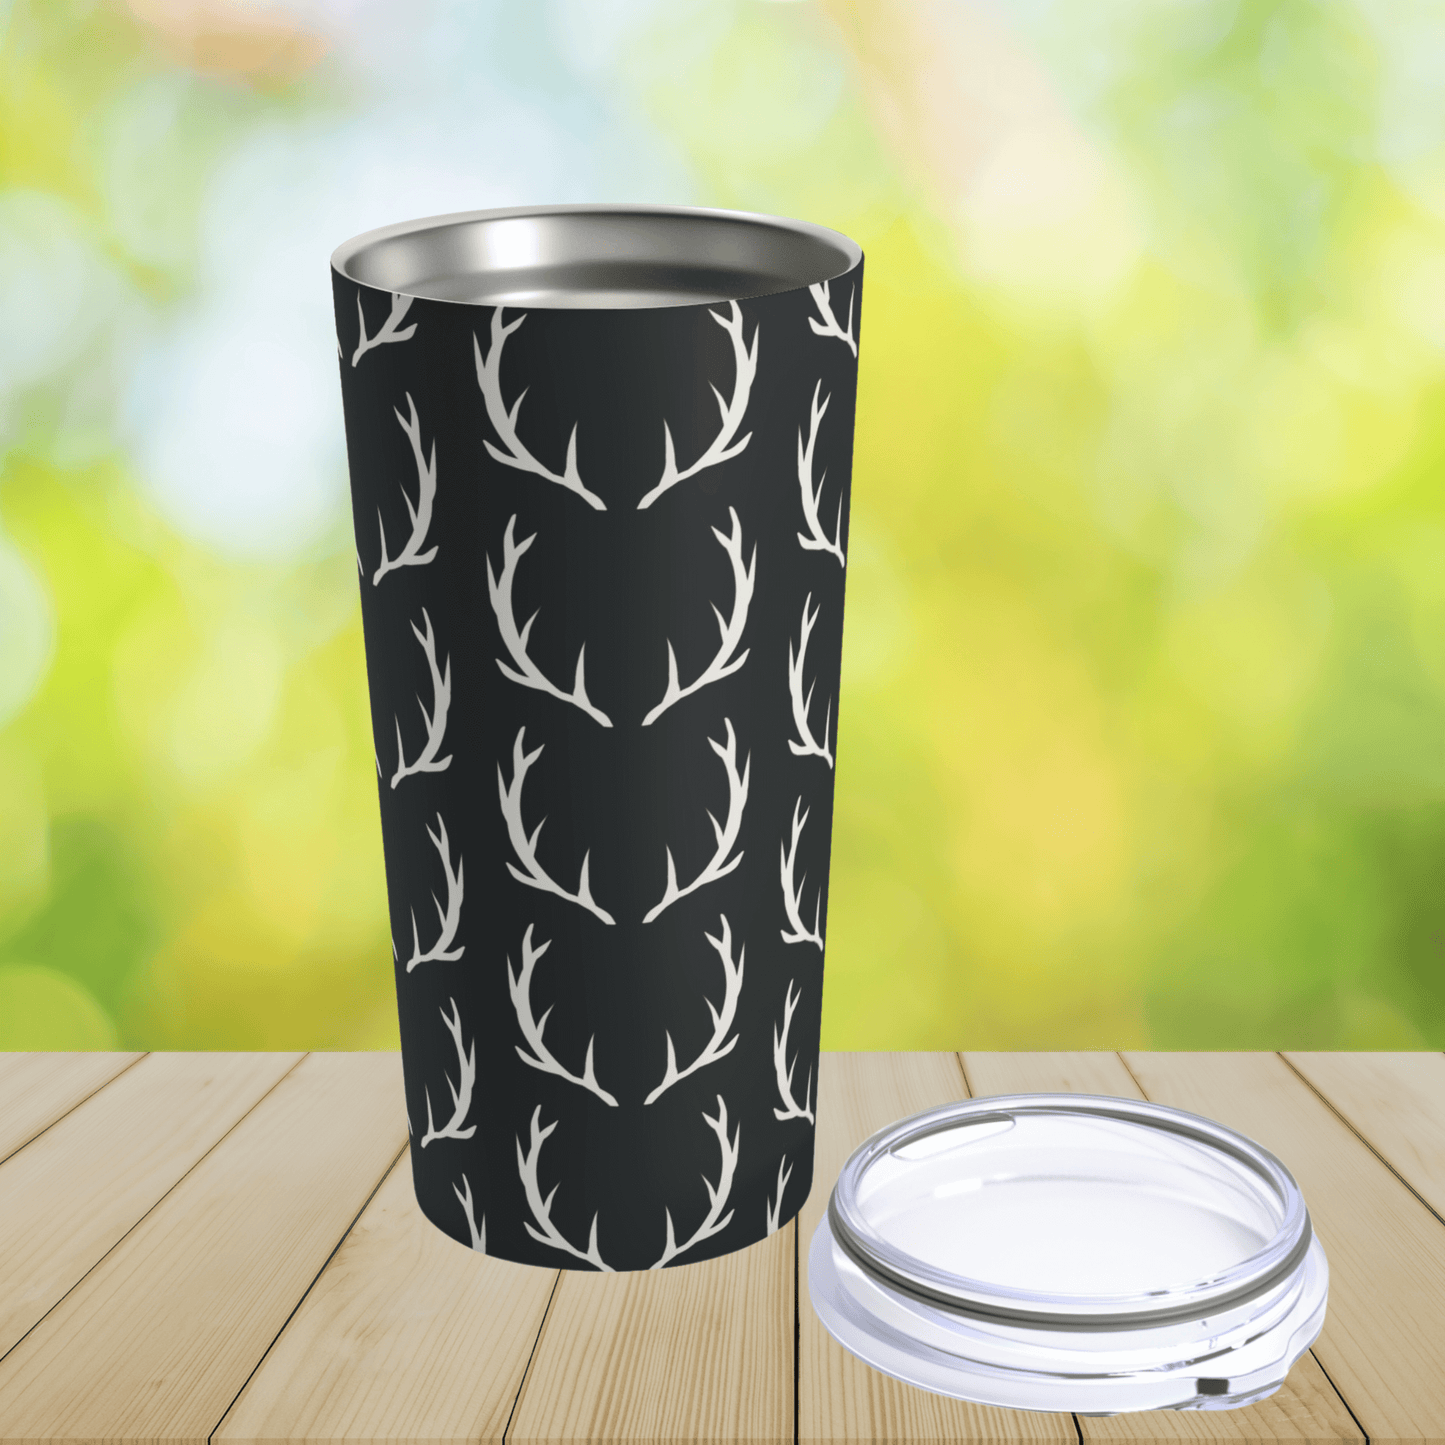 Men will love their own unique personalized travel tumbler. Our tumblers can be personalized and make the perfect groomsmen gifts, gifts for hunters or a gift for boyfriend, husband or brother.